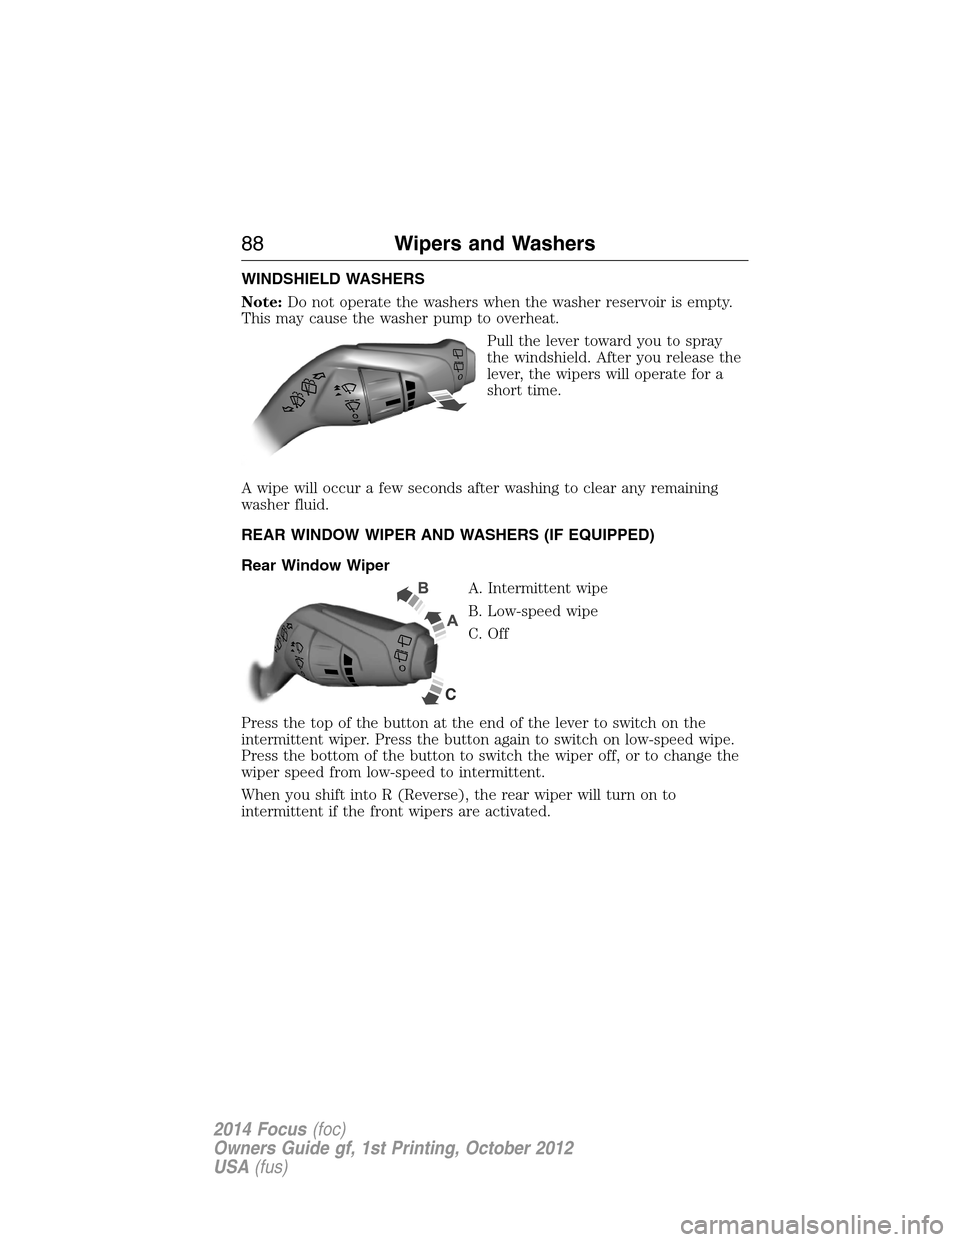 FORD FOCUS 2014 3.G Owners Manual WINDSHIELD WASHERS
Note:Do not operate the washers when the washer reservoir is empty.
This may cause the washer pump to overheat.
Pull the lever toward you to spray
the windshield. After you release 